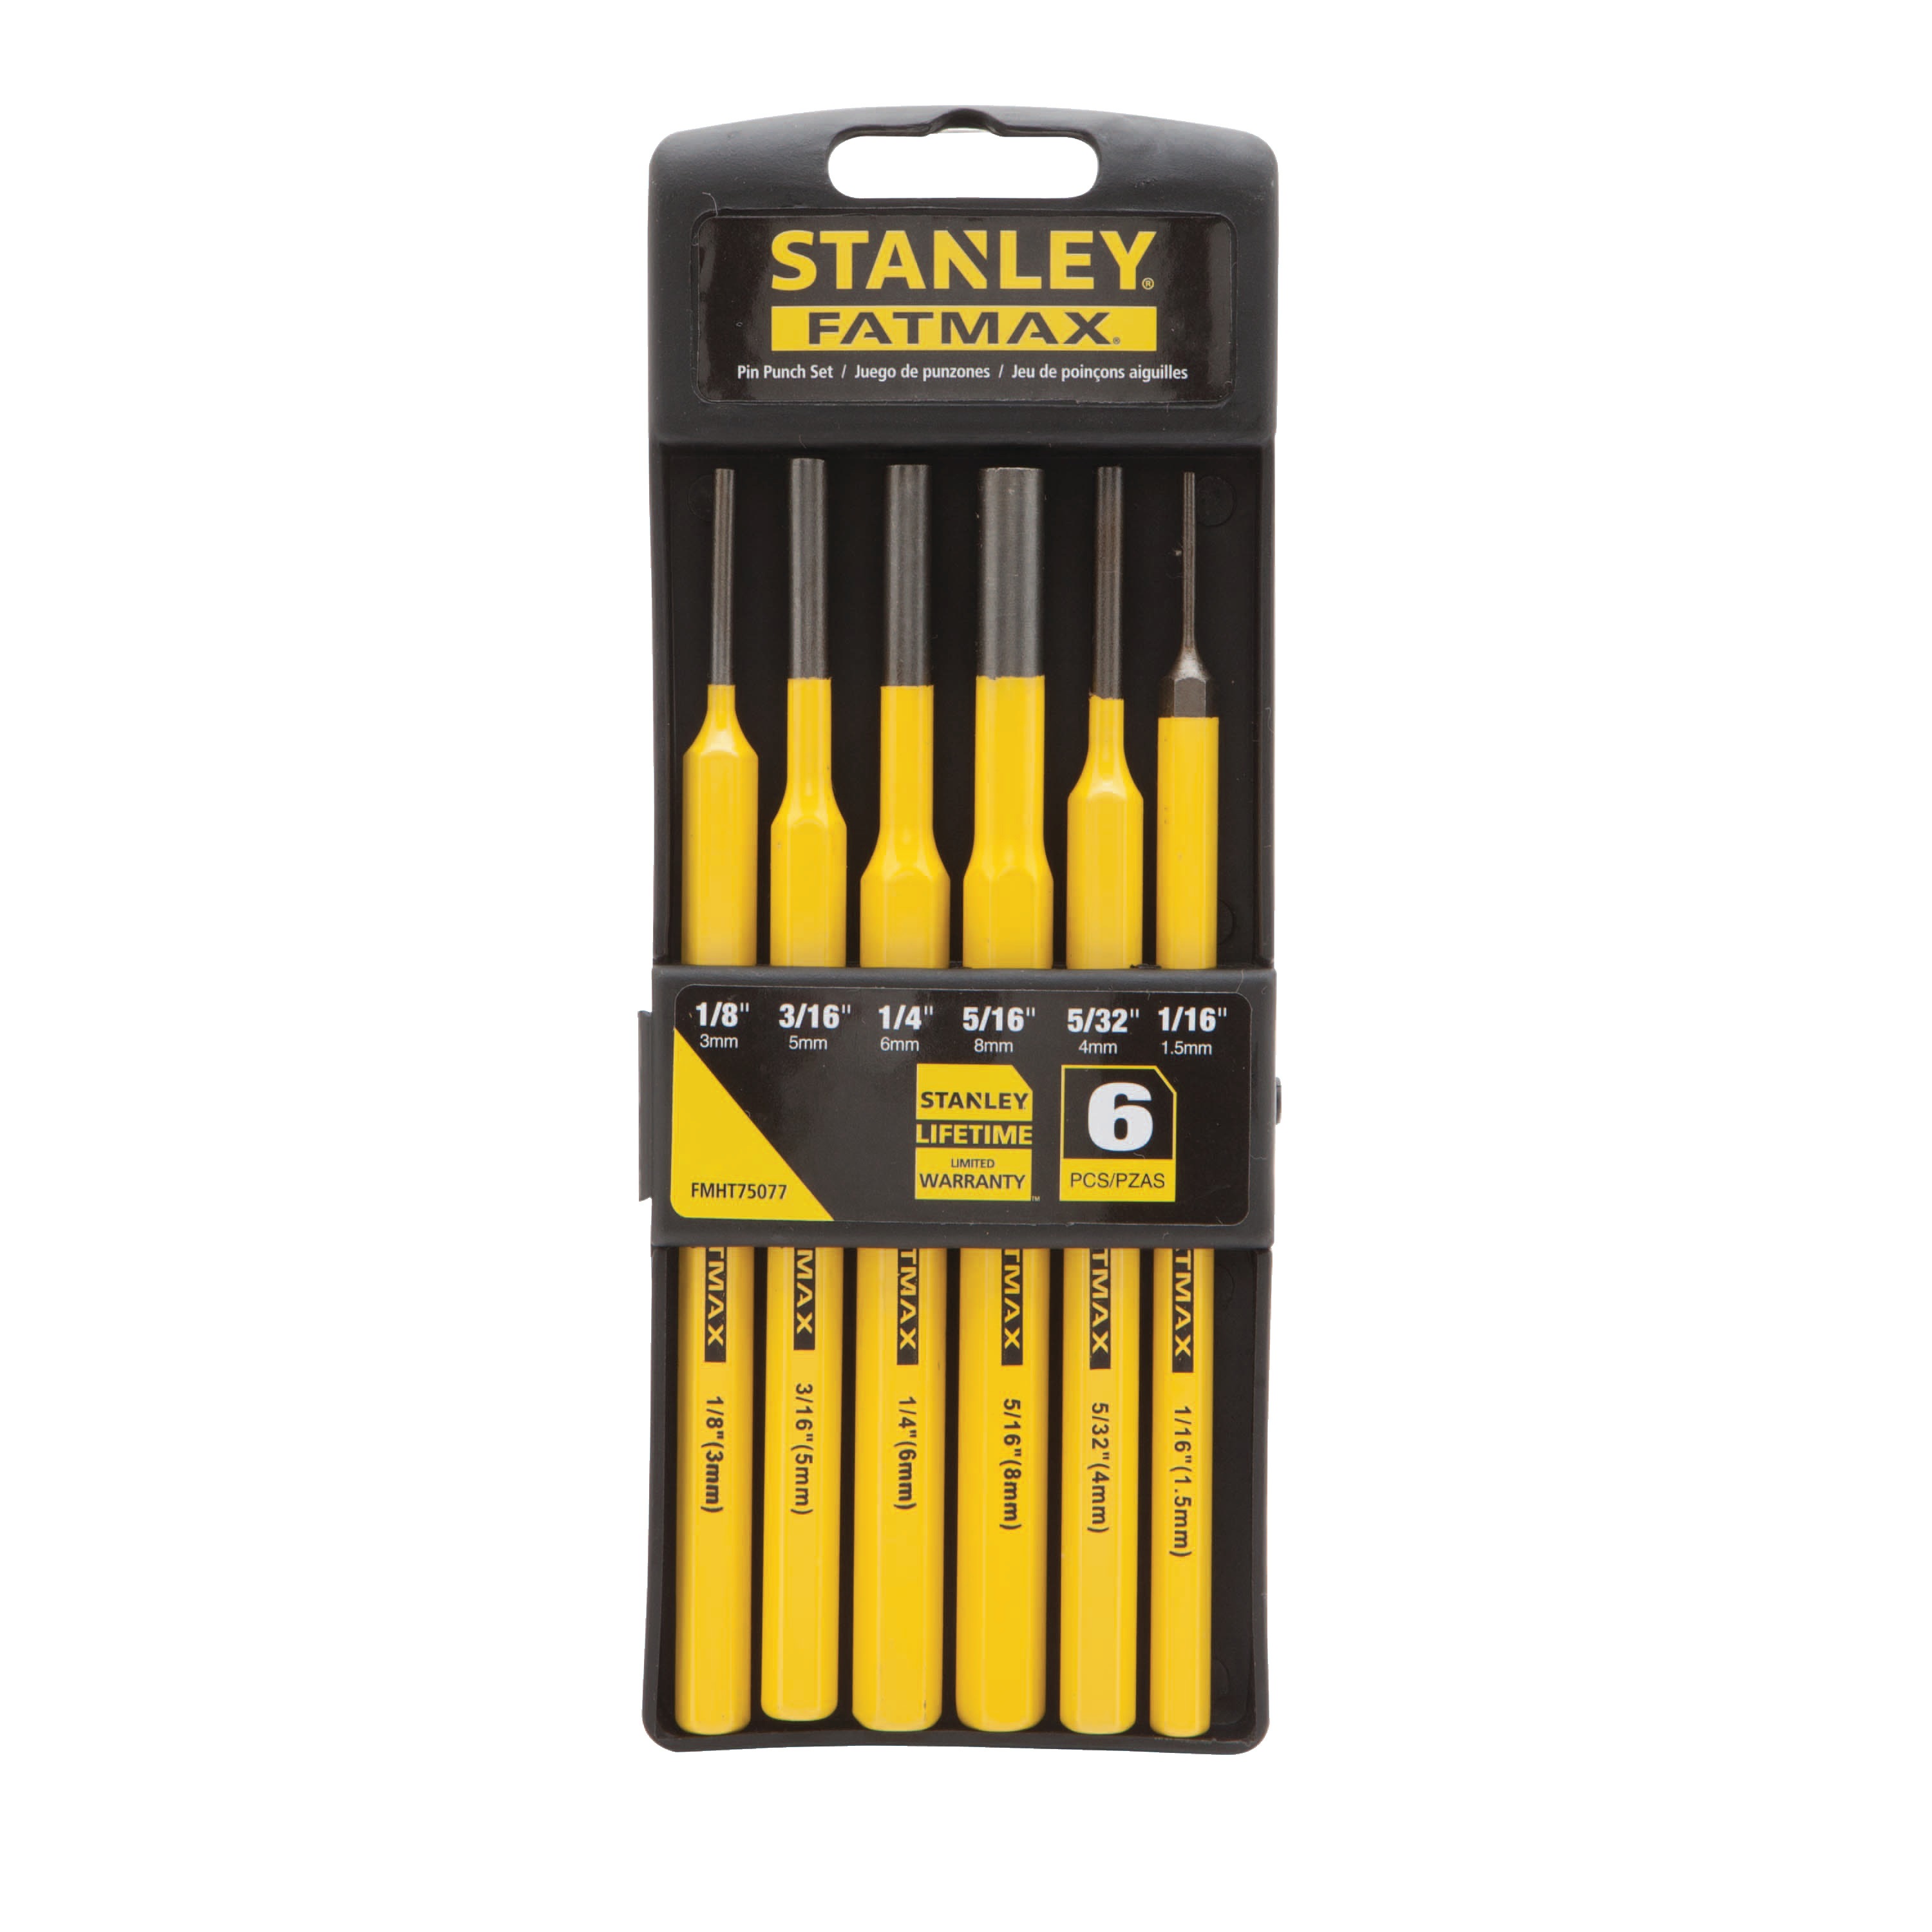 Stanley Tools - 6 pc FATMAX Punch Set - FMHT75077